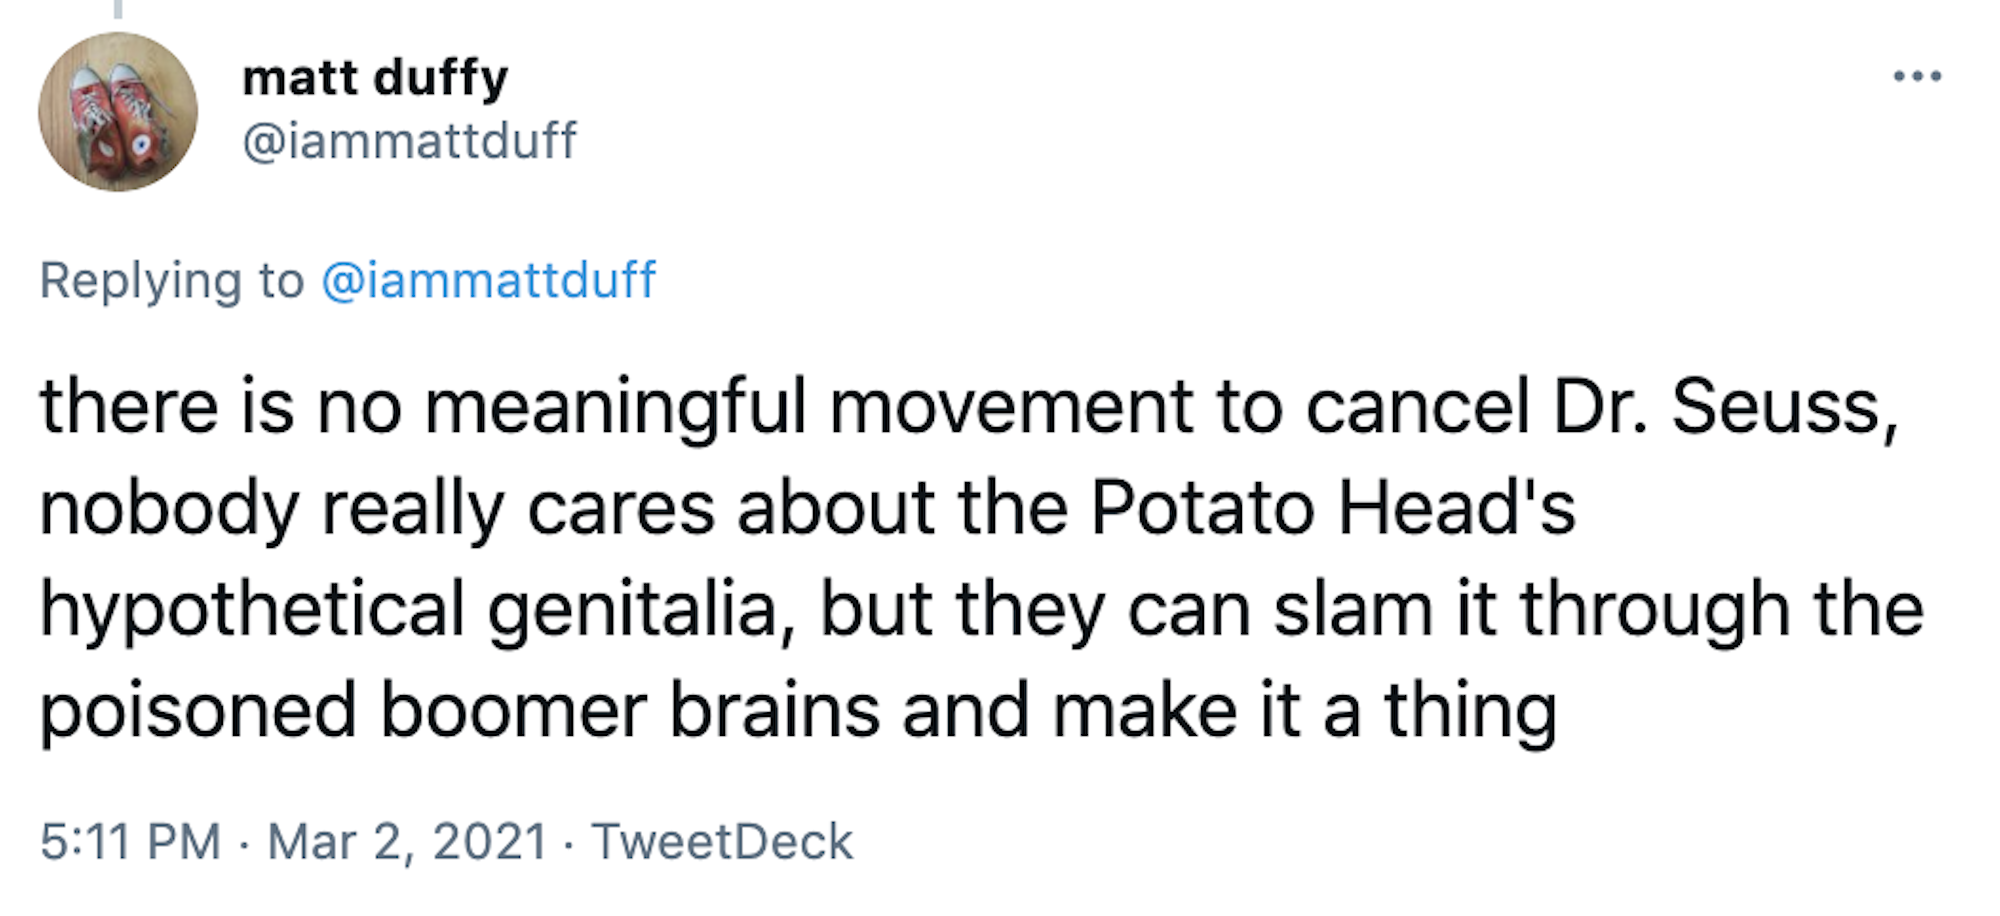 there is no meaningful movement to cancel Dr. Seuss, nobody really cares about the Potato Head's hypothetical genitalia, but they can slam it through the poisoned boomer brains and make it a thing